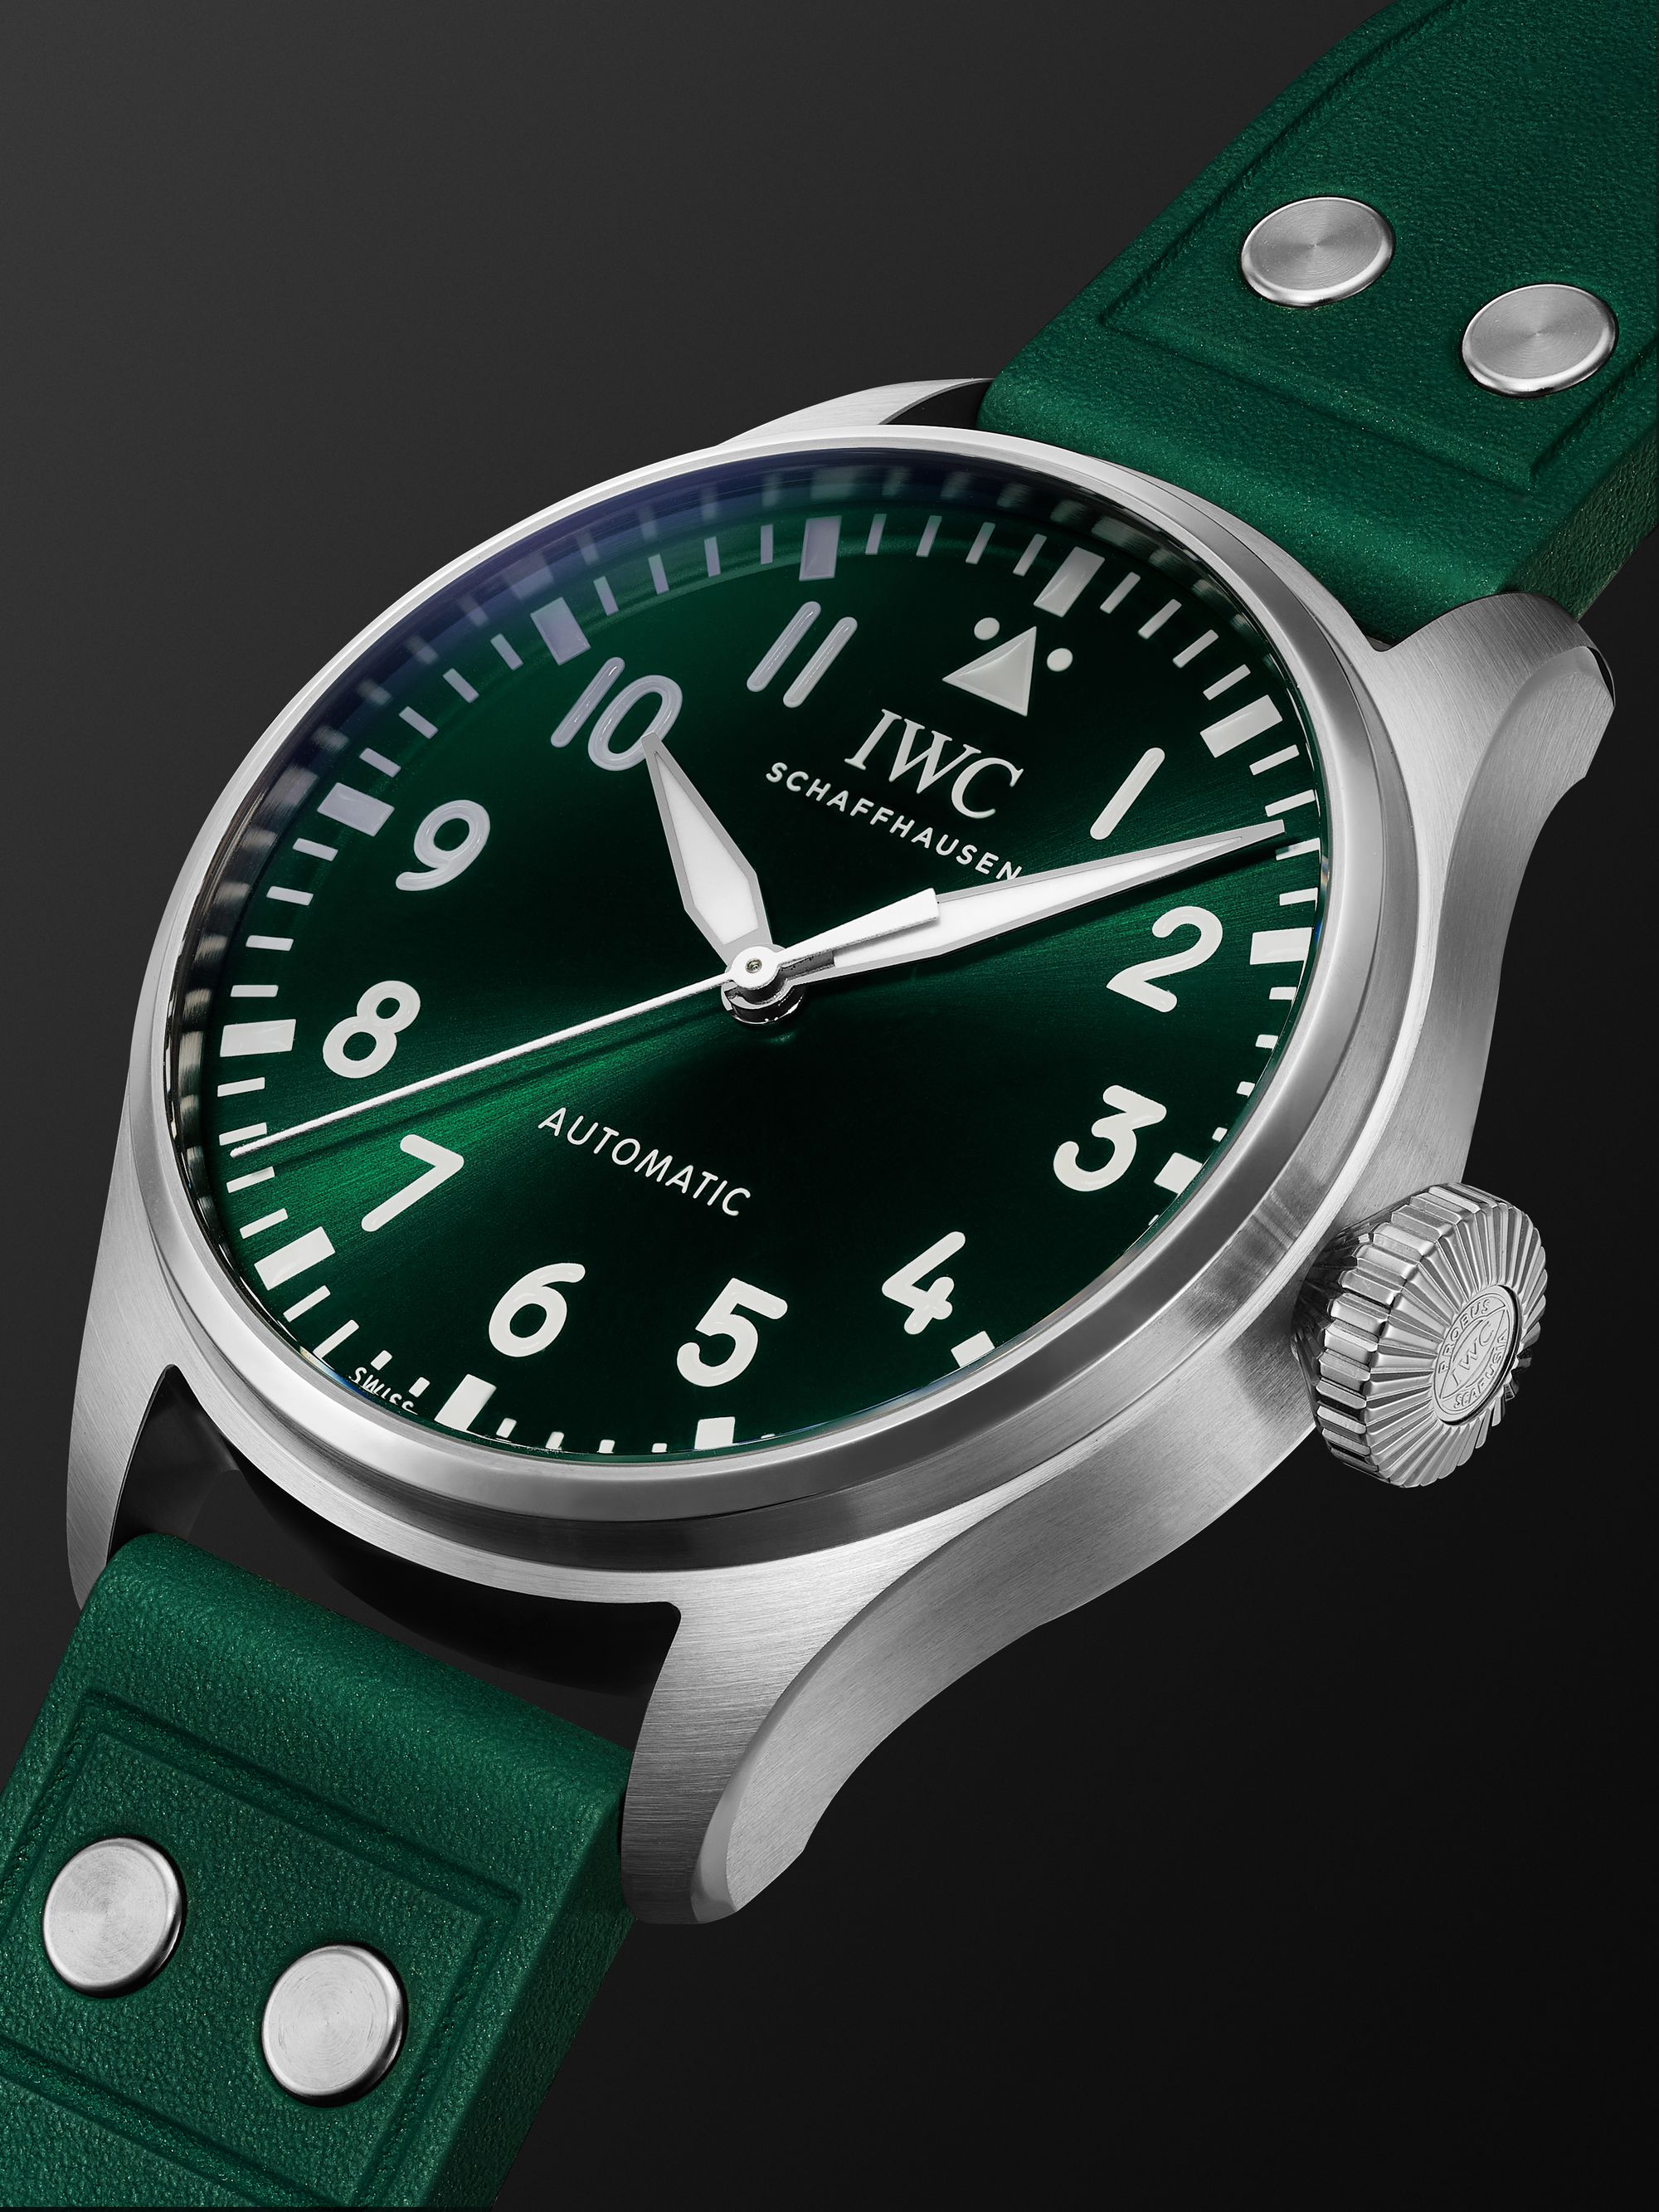 IWC SCHAFFHAUSEN Big Pilot's Automatic 43mm Stainless Steel and Rubber Watch, Ref. No. IW329306